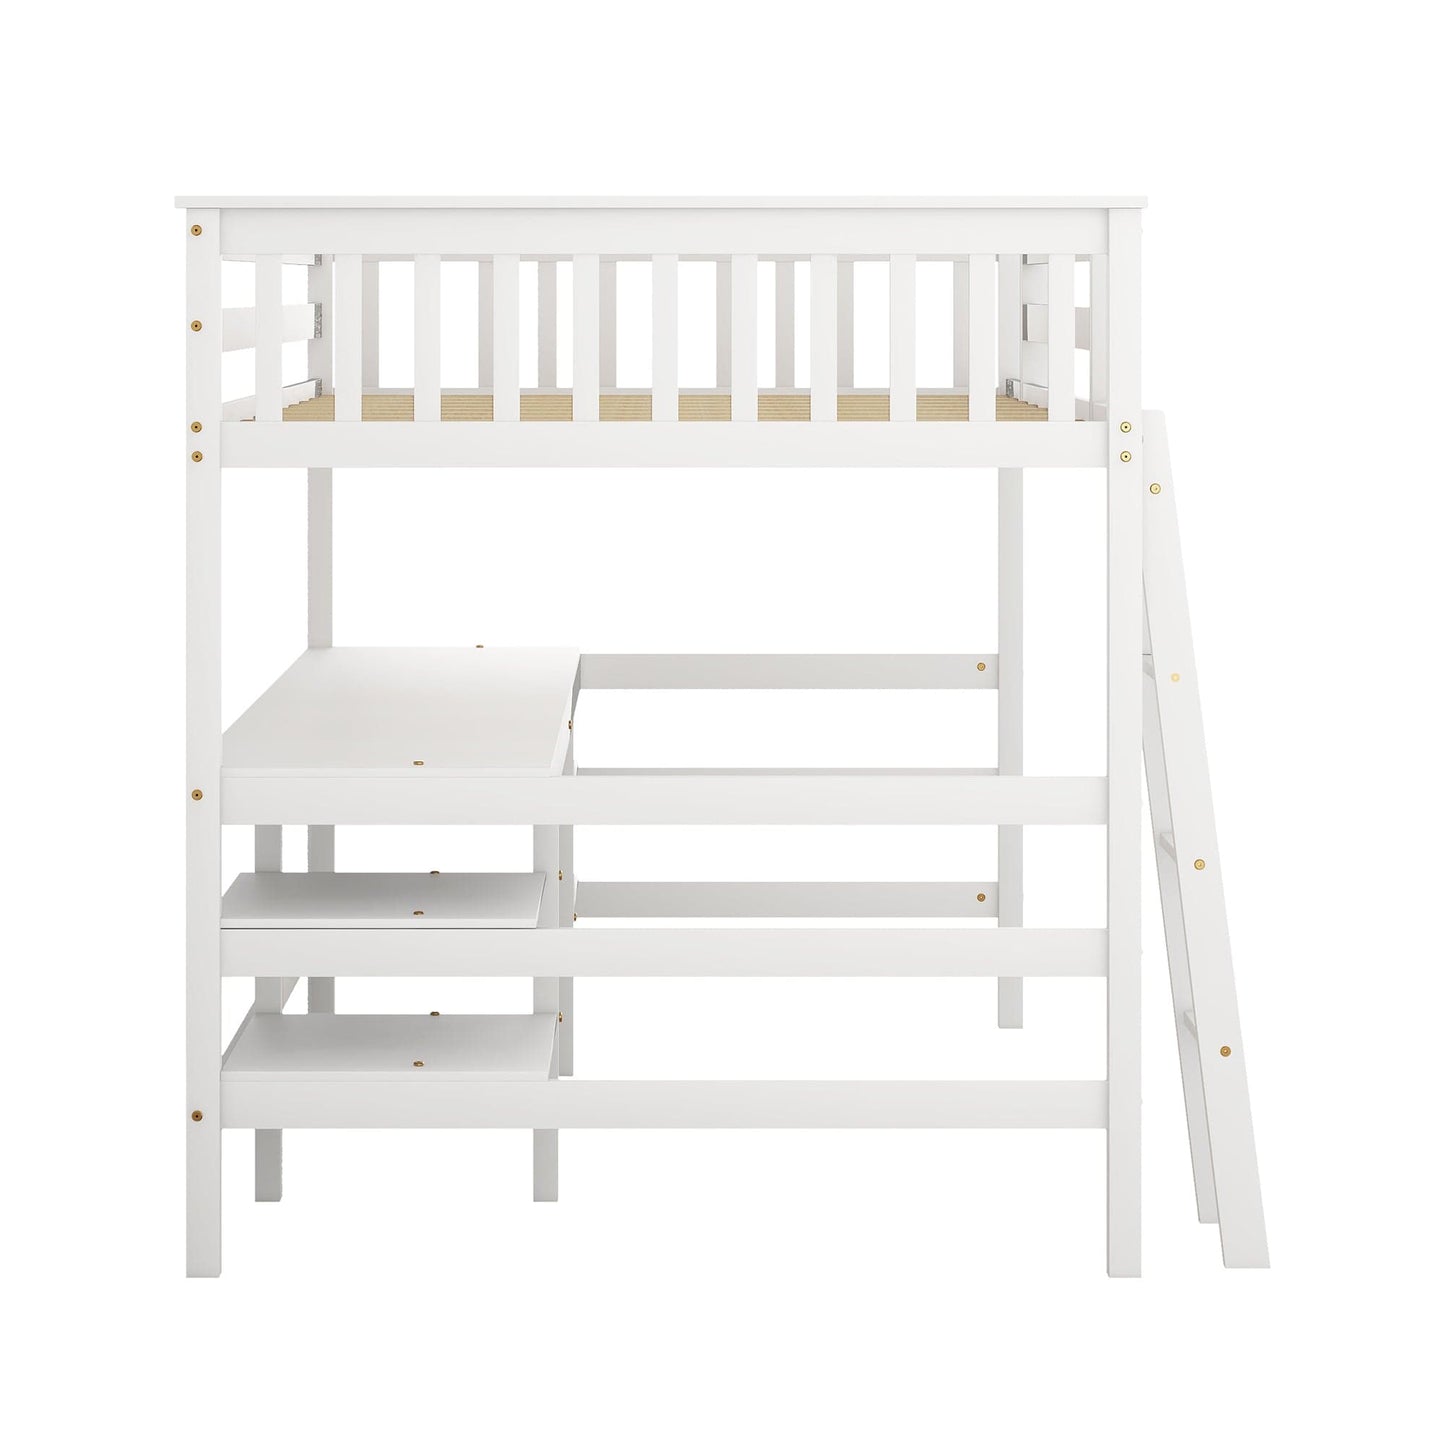 1st Choice Furniture Direct Loft Bed 1st Choice White Full Size Loft Bed with Built-In Desk and Shelves